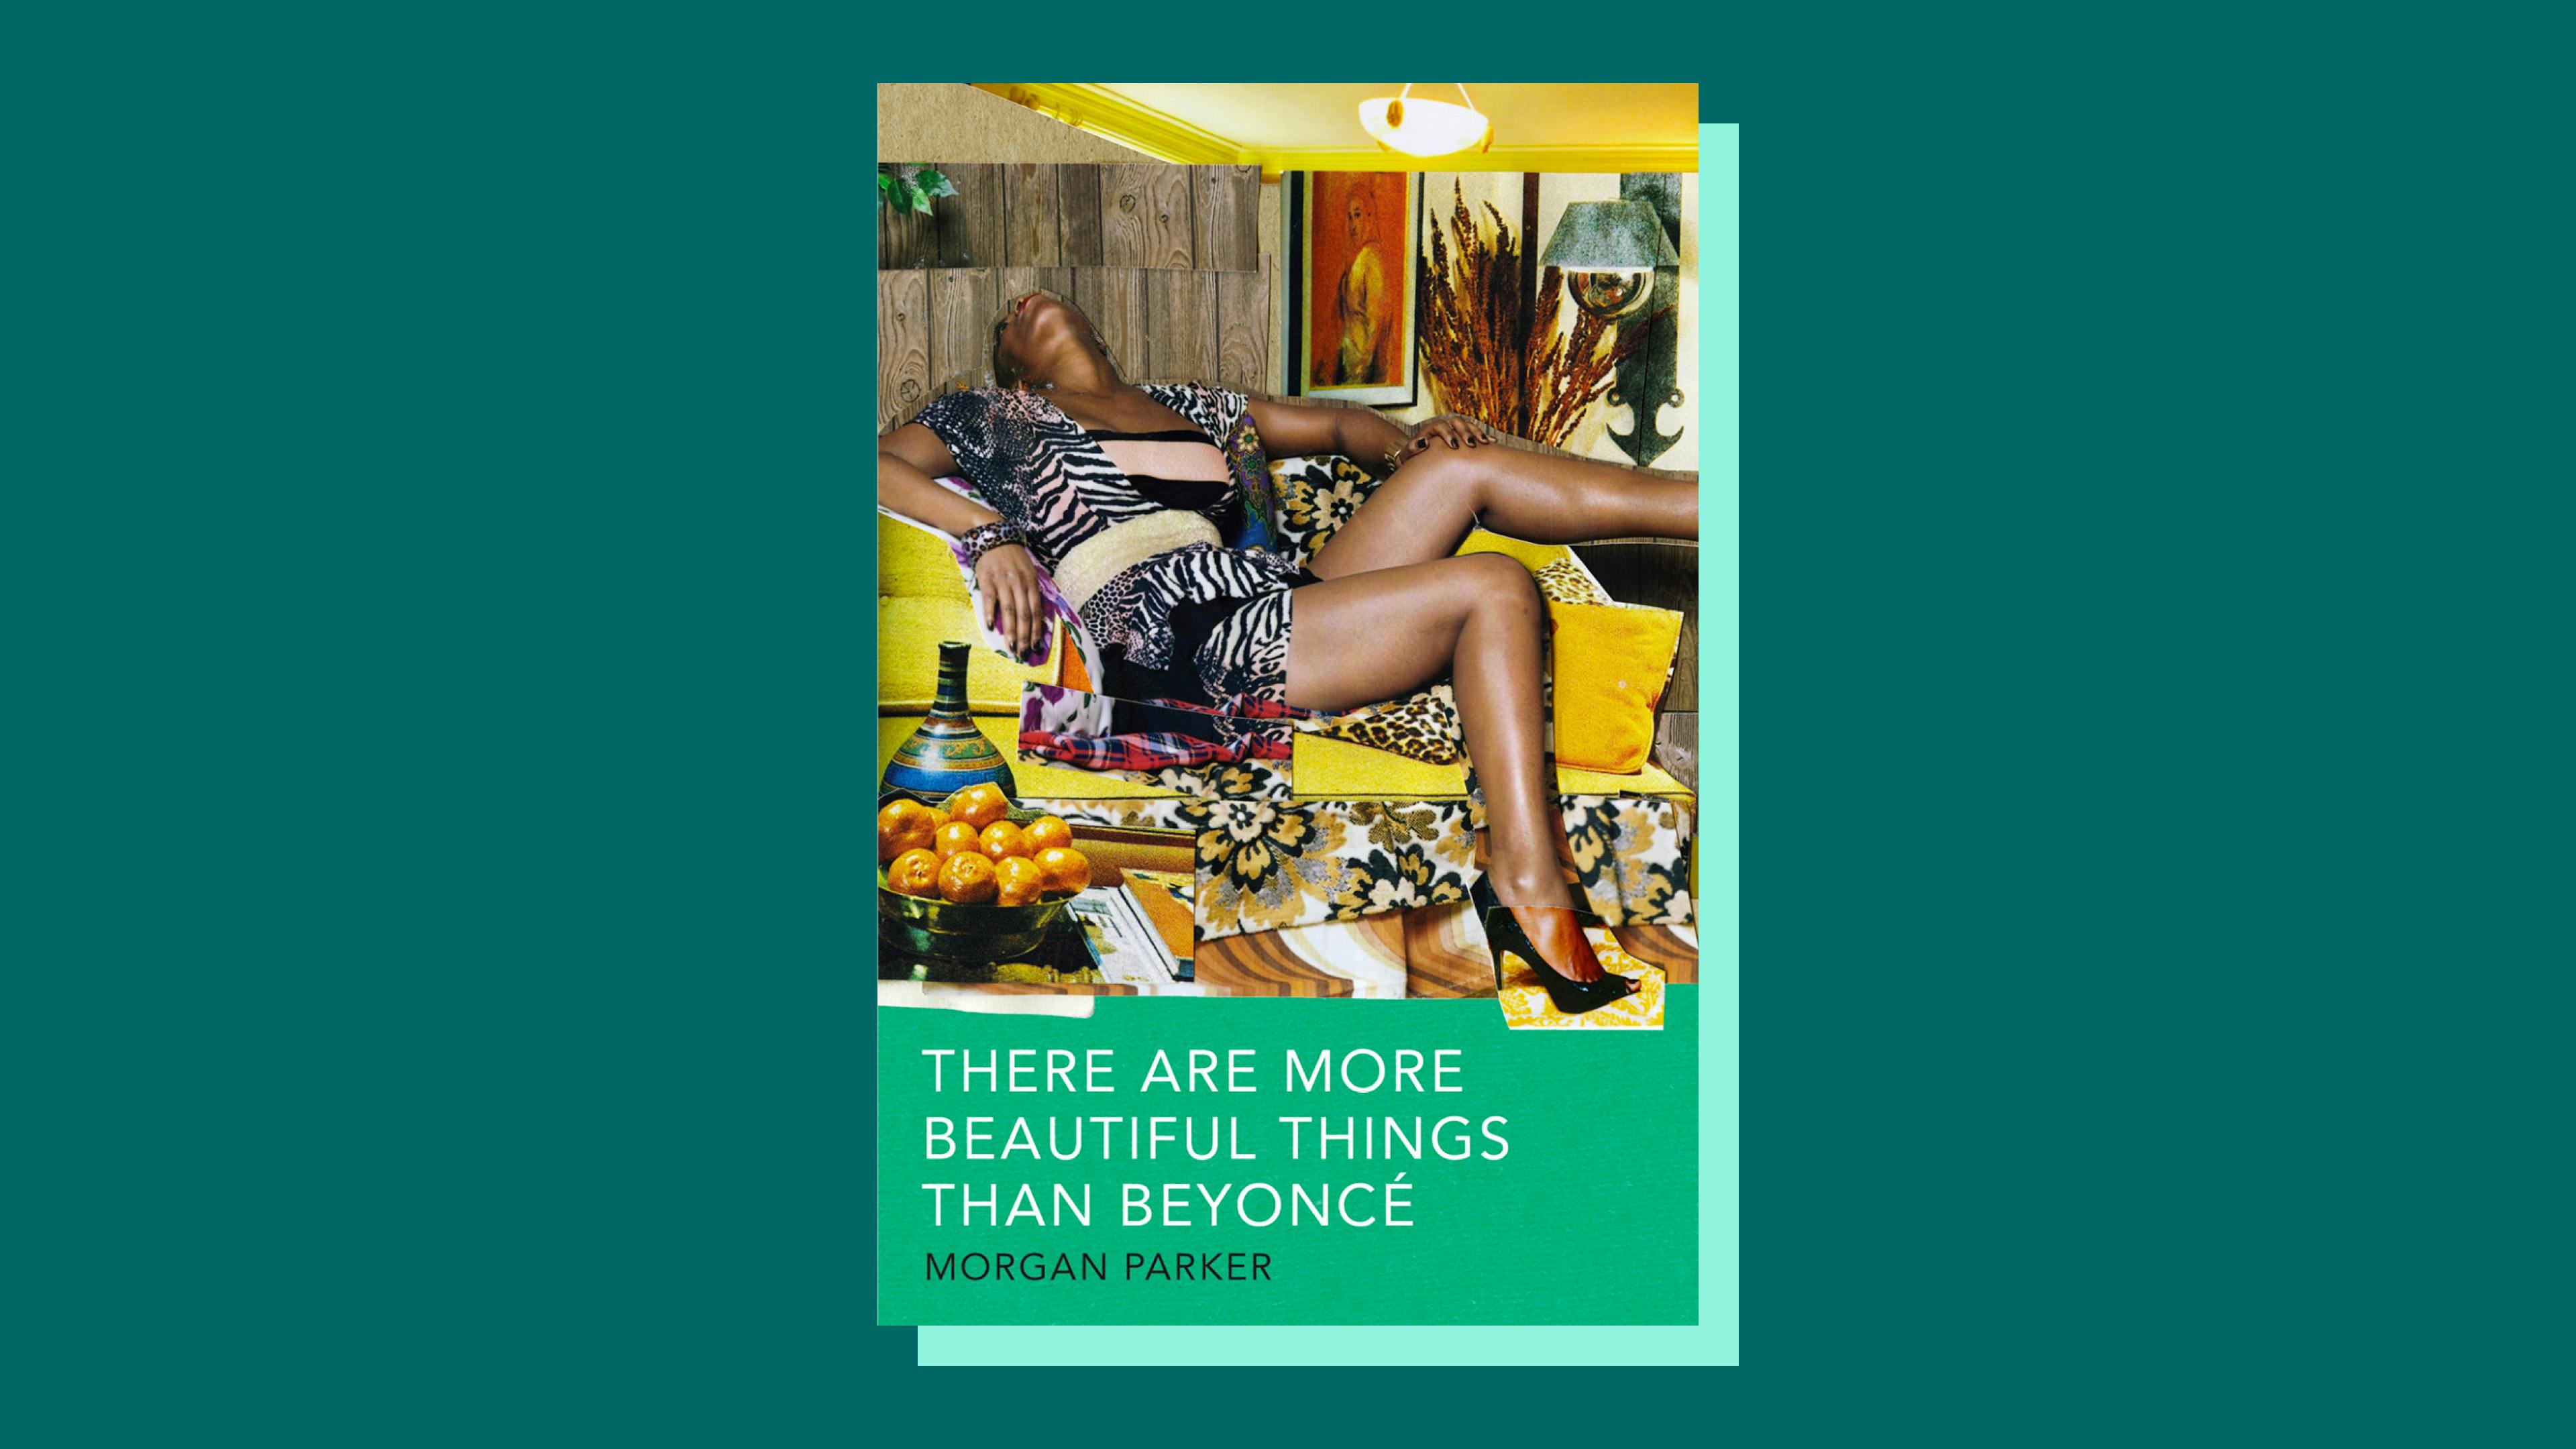 “There are More Beautiful Things than Beyoncé” by Morgan Parker 